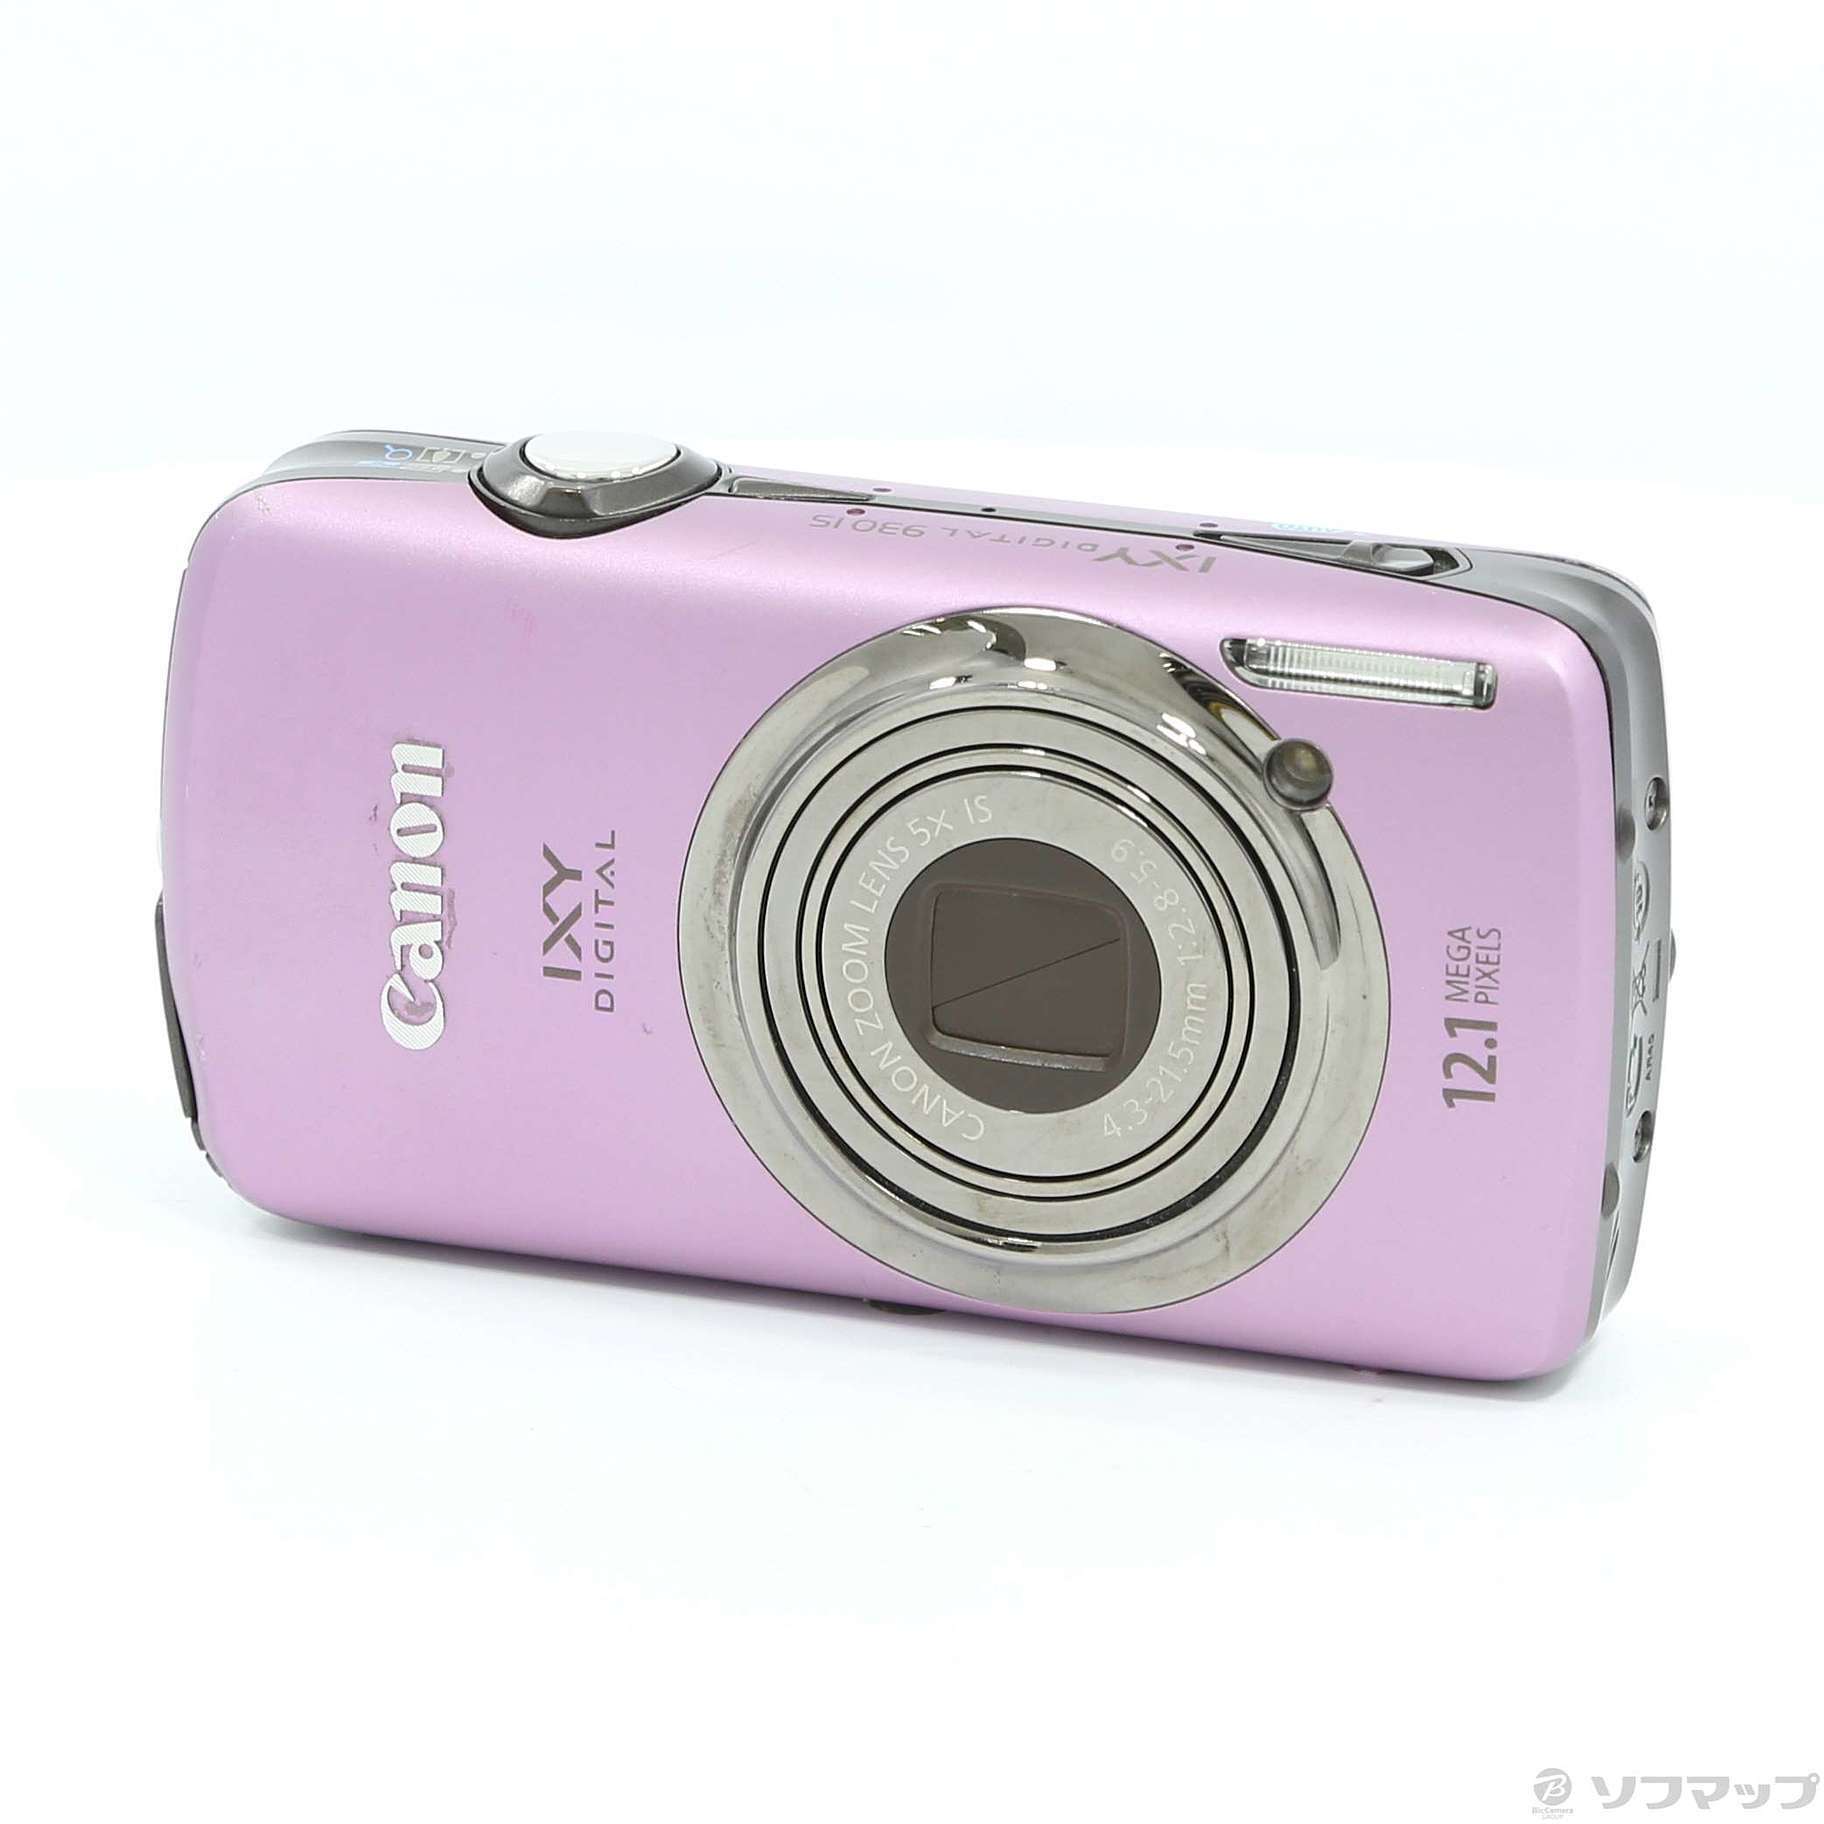 Canon ixy digital 930 is | kinderpartys.at